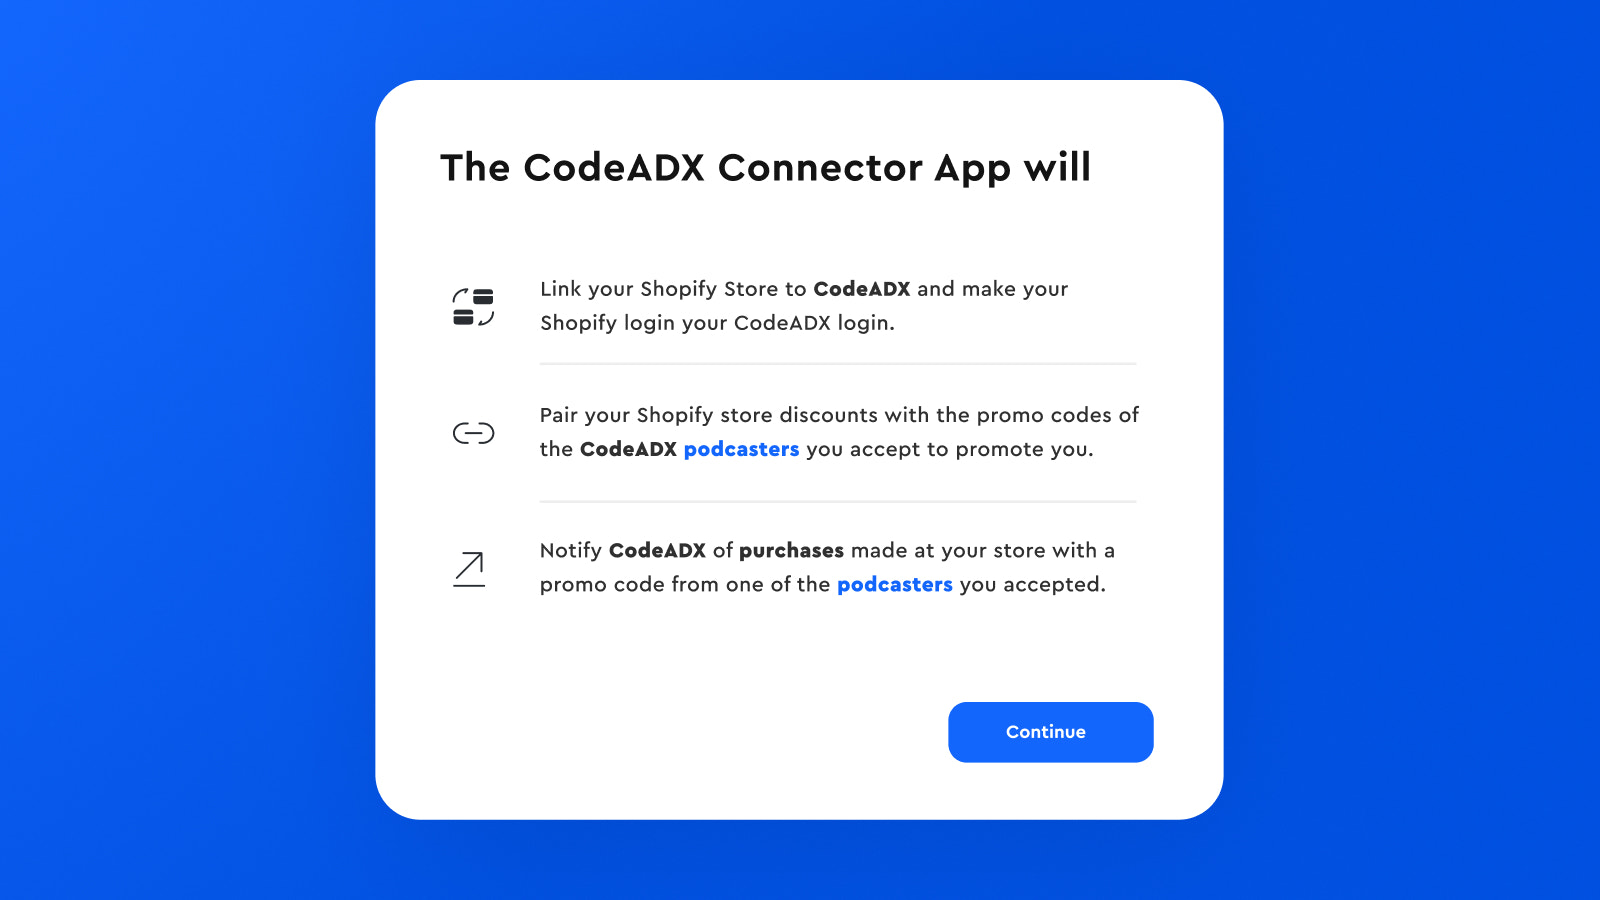 What will CodeADX Connector App do